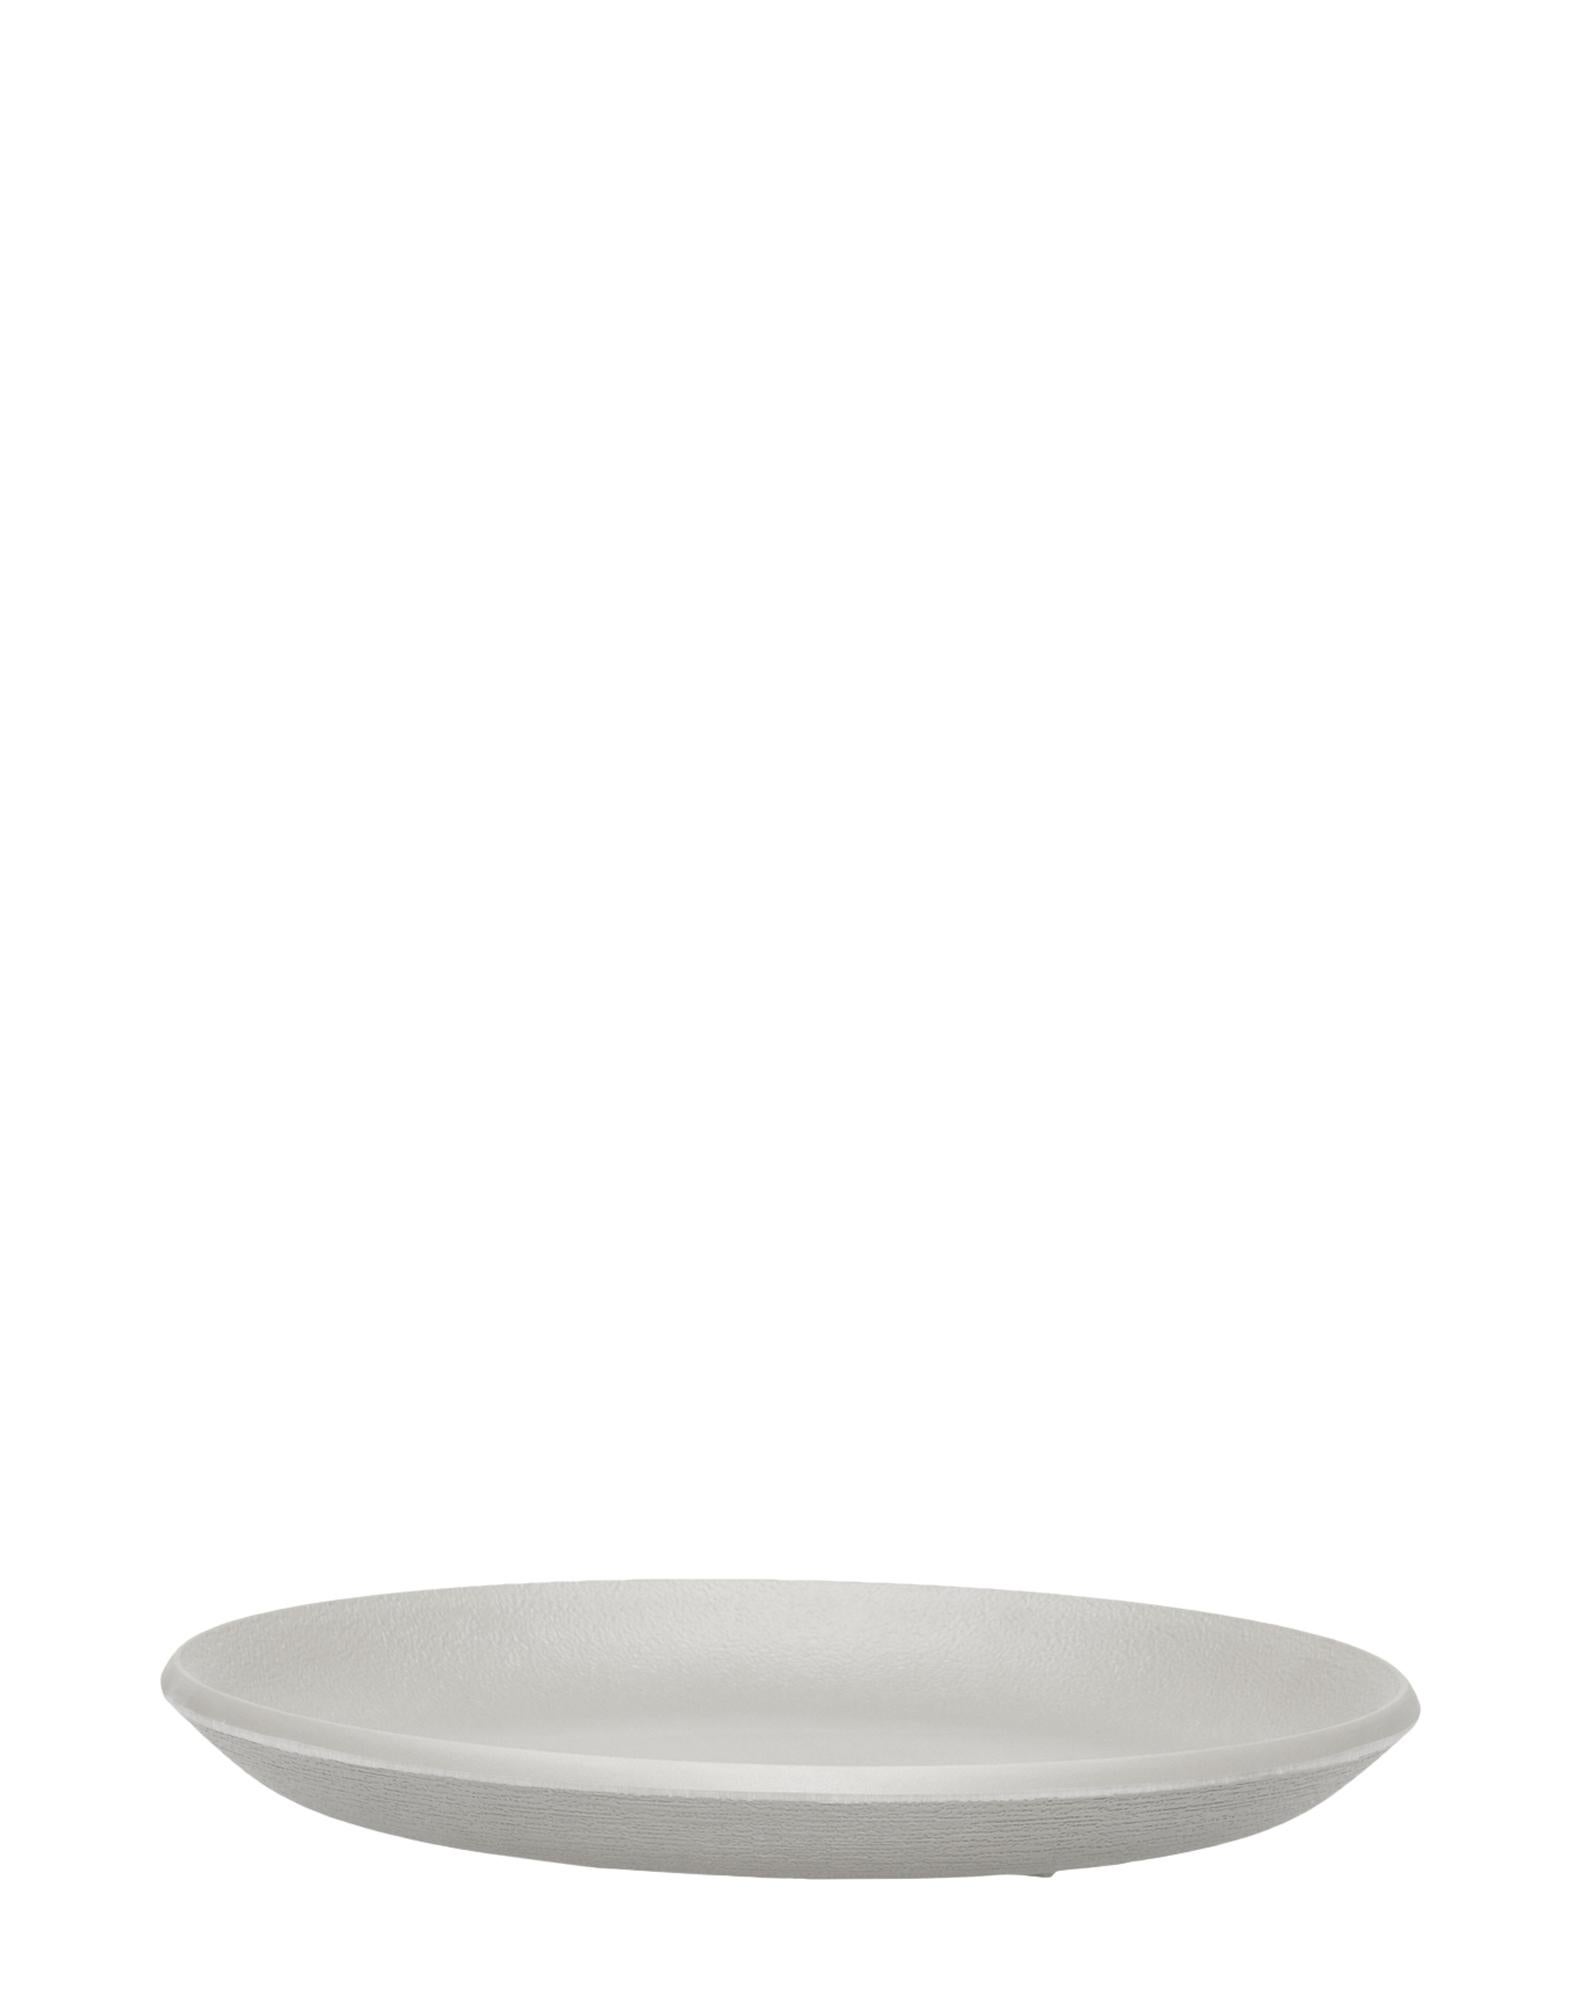 Set of 4 Kartell Trama Plate in Light Grey by Patricia Urquiola In New Condition For Sale In Brooklyn, NY